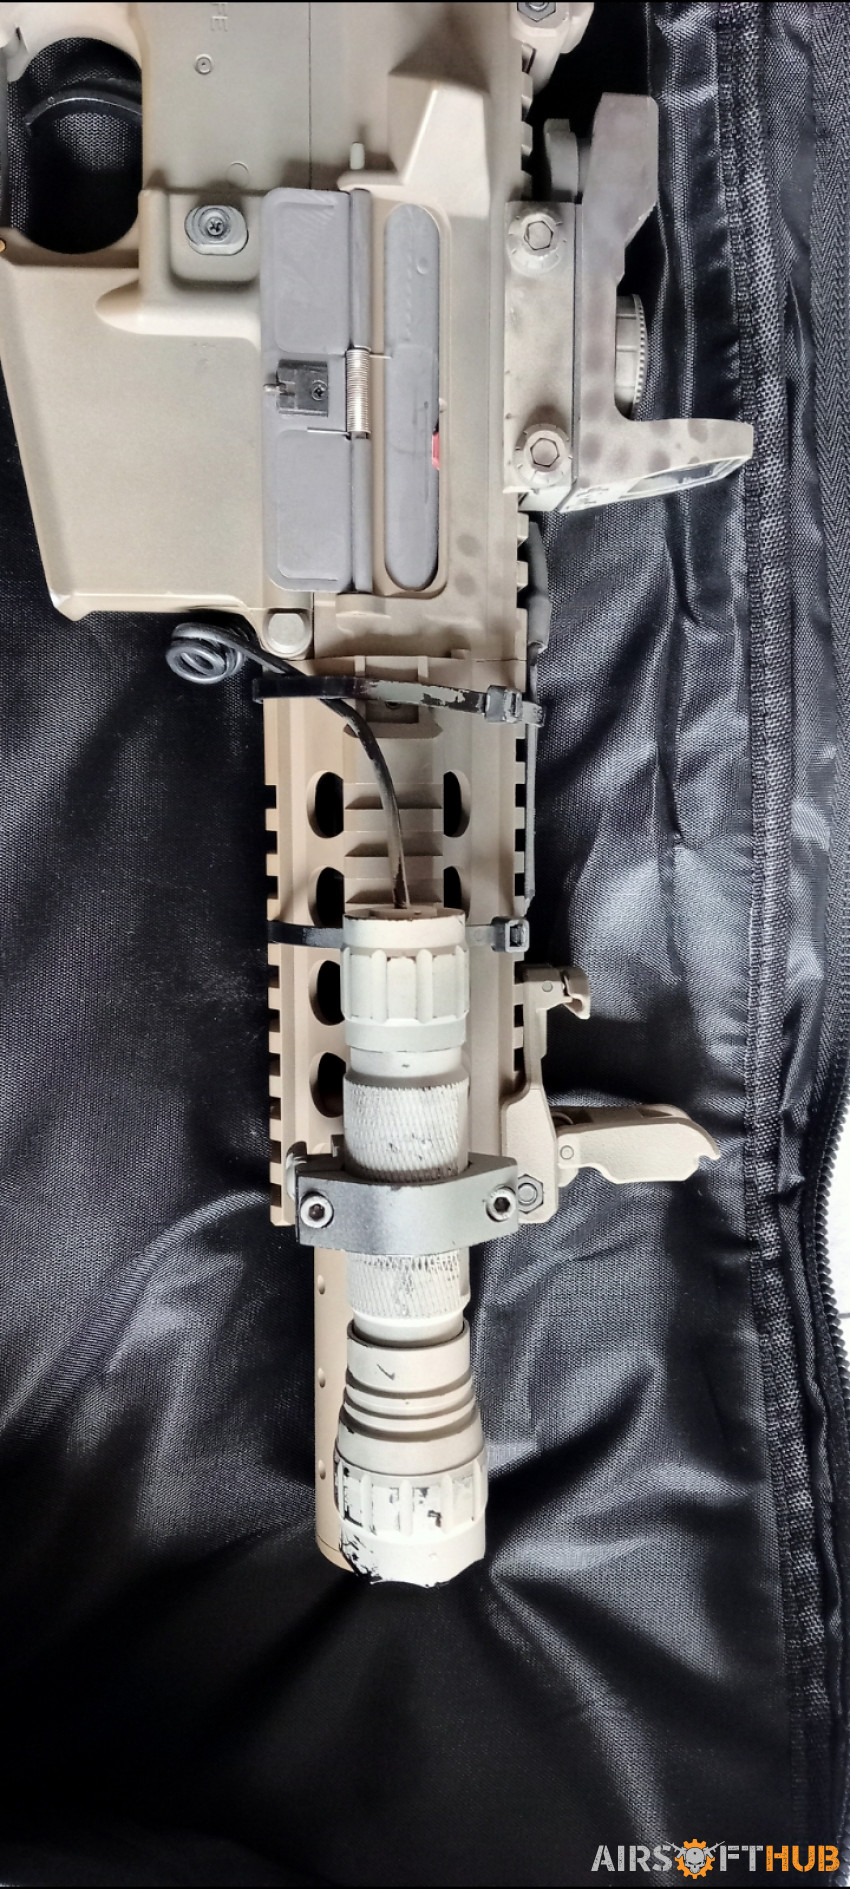 Cybergun Colt M4 Special Force - Used airsoft equipment